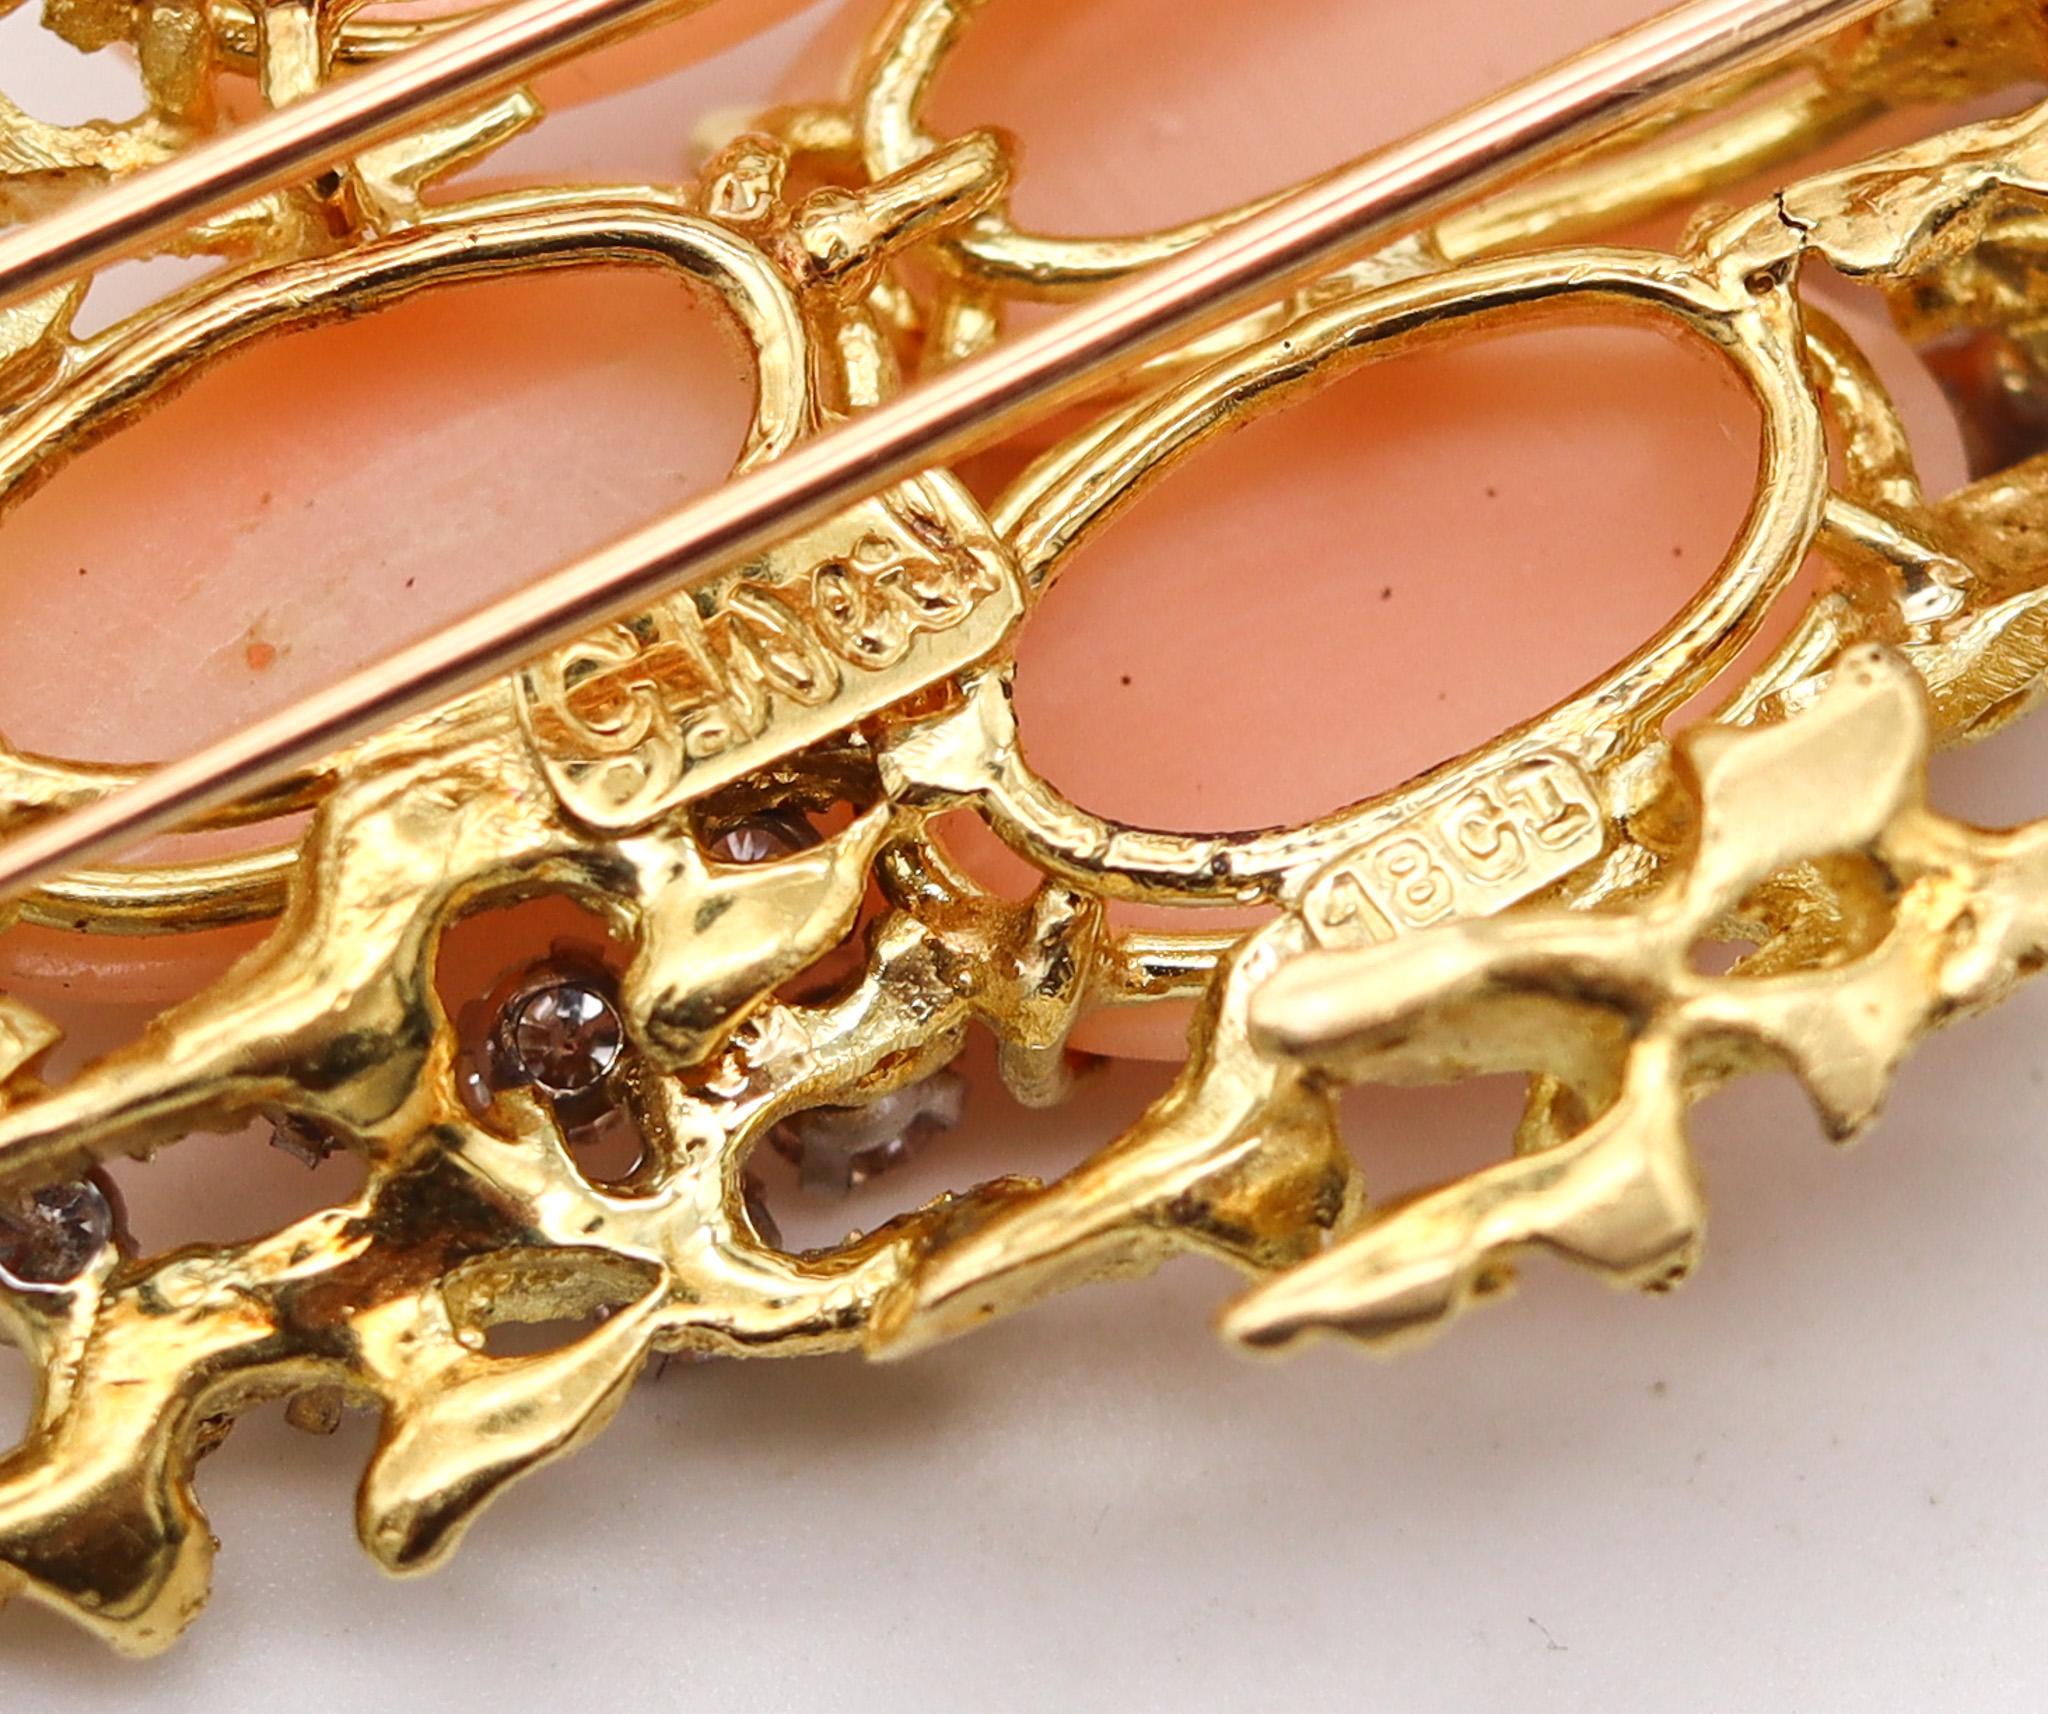 George Weil 1960 Brutalist Pendant Brooch In 18Kt Gold Diamonds And Corals In Excellent Condition For Sale In Miami, FL